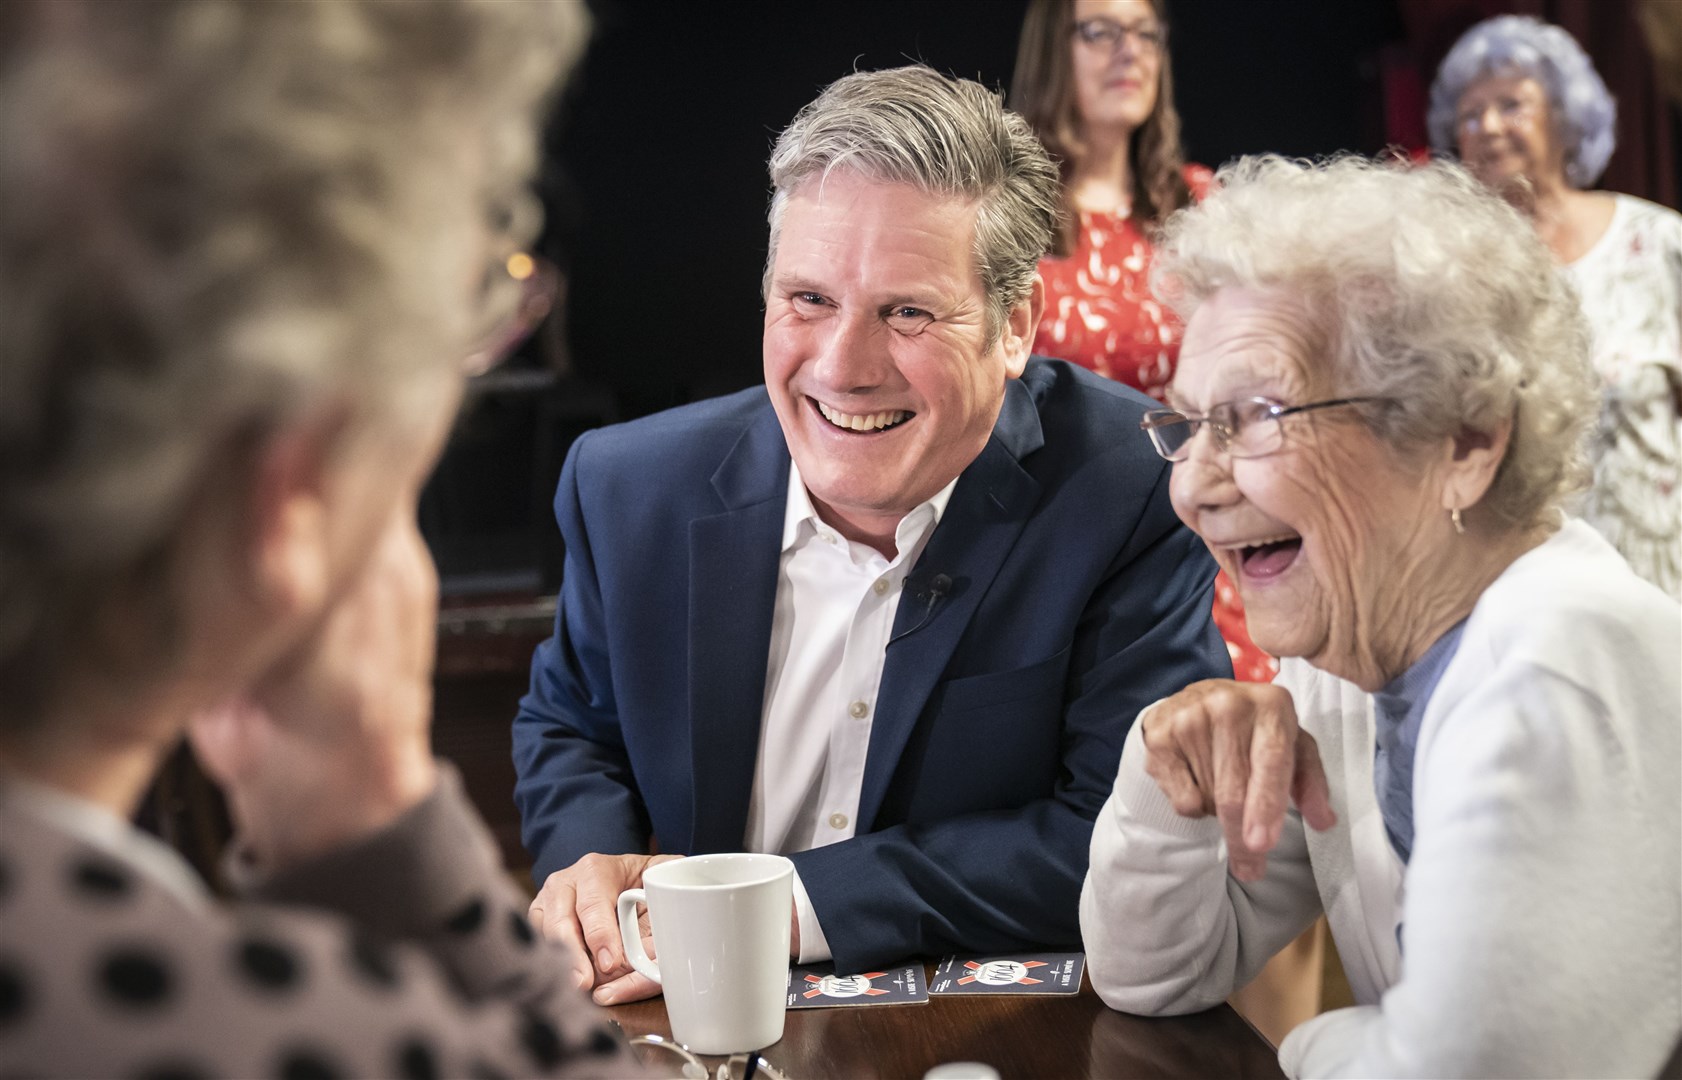 Labour leader Keir Starmer during a visit to a pensioners drop-in session in Wakefield, West Yorkshire (Danny Lawson/PA)